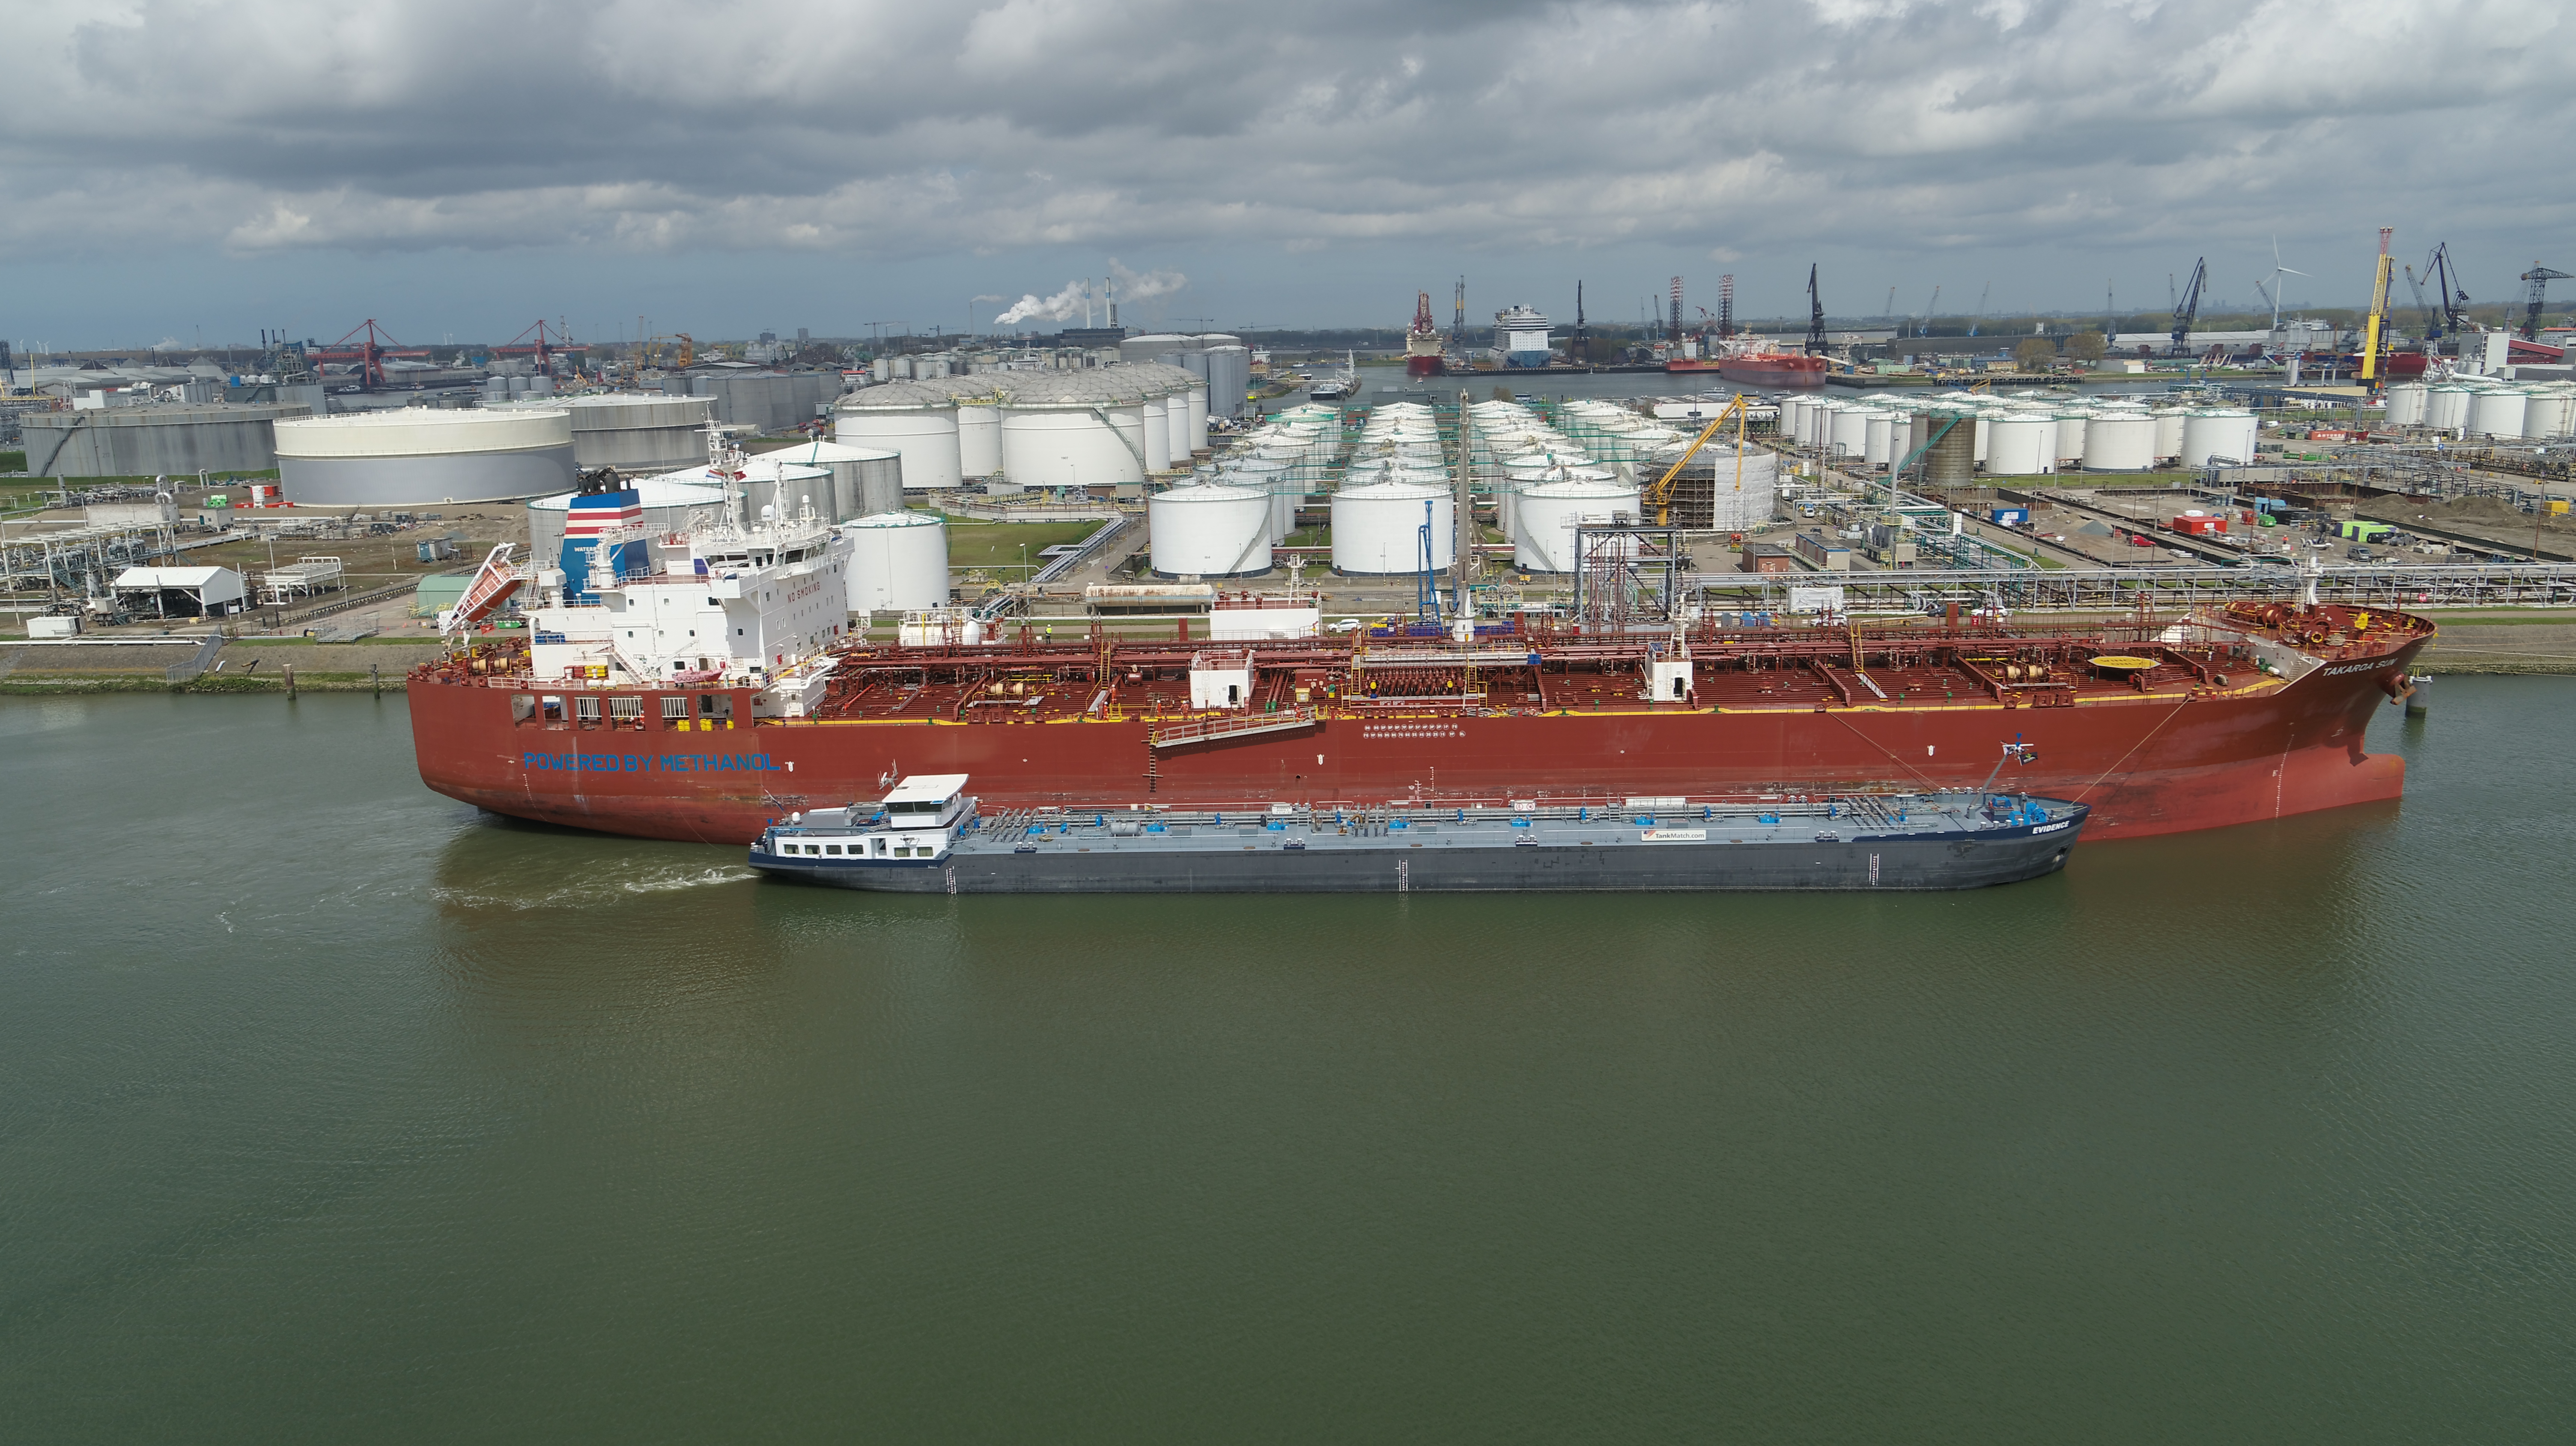 Waterfront Shipping takes leadership role in demonstrating simplicity of methanol bunkering to marine industry